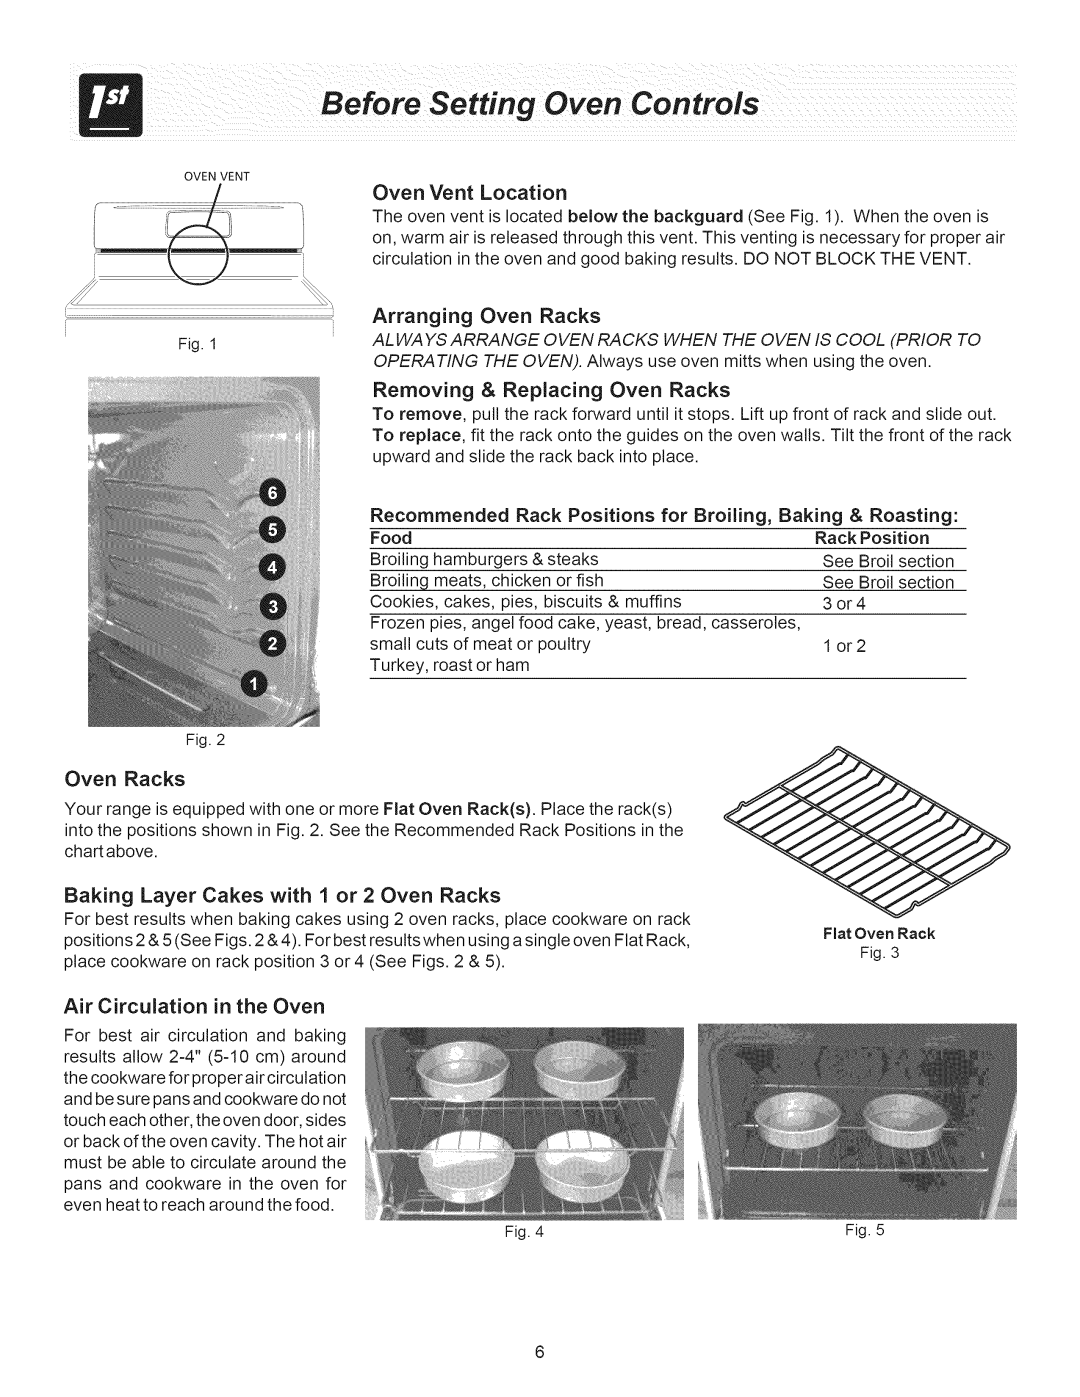 Crosley ES300 Ovenvent, Oven Vent Location, Removing & Replacing Oven Racks, Baking Layer Cakes with 1 or 2 Oven Racks 